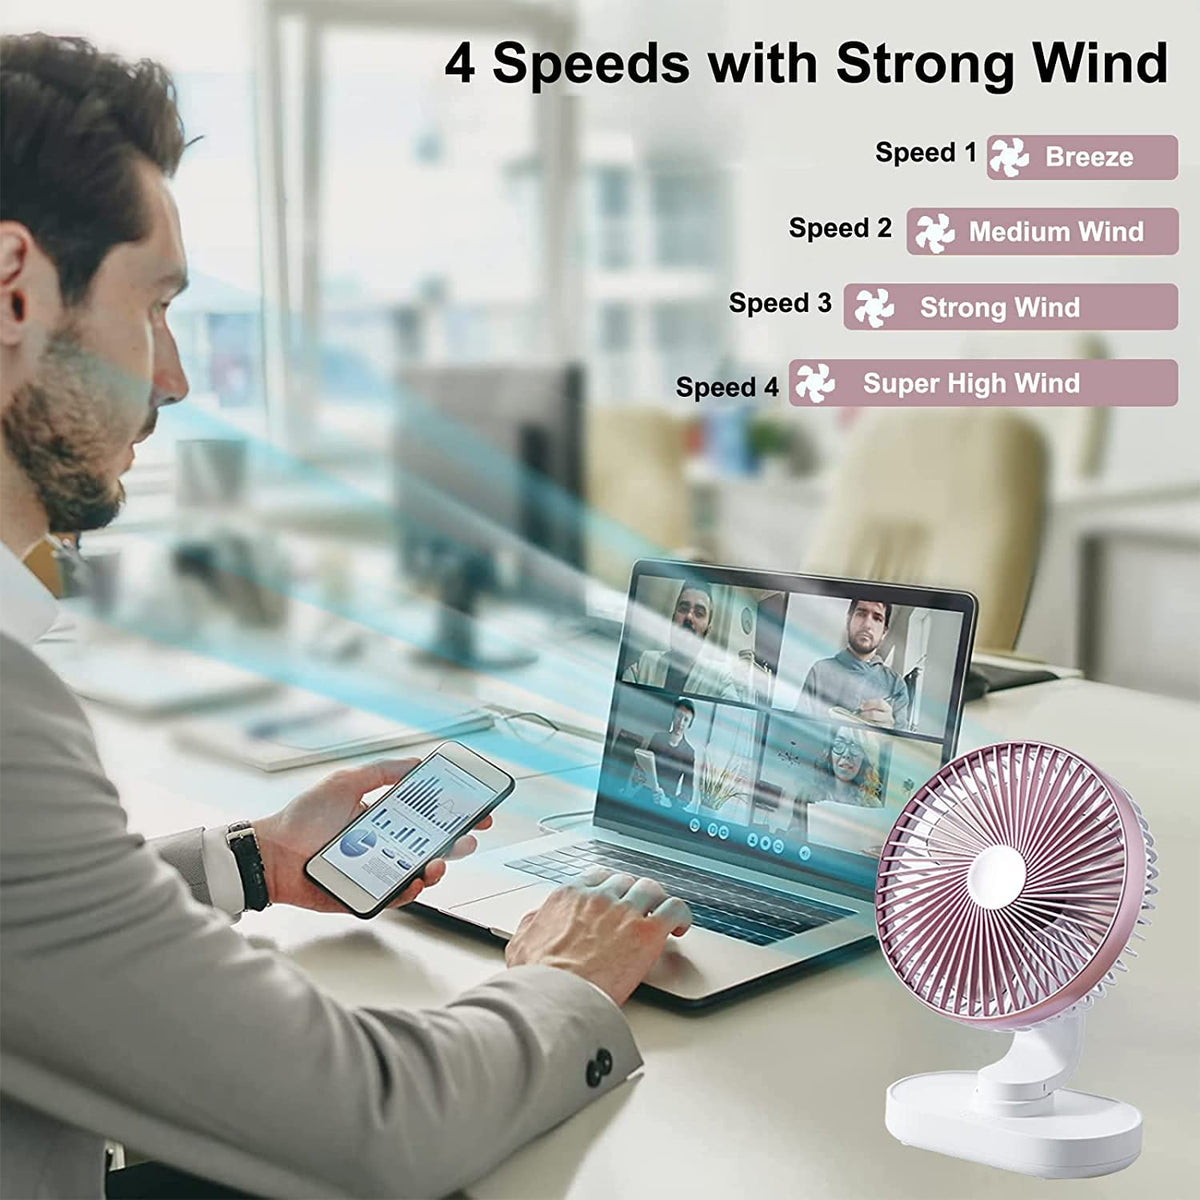 ASDQWE USB Mini Desk Fan,Portable Oscillating Fan with 4 Speeds,6.5-inch  Adjustable Quiet Table Fan,Rechargeable Battery Operated Personal for Home